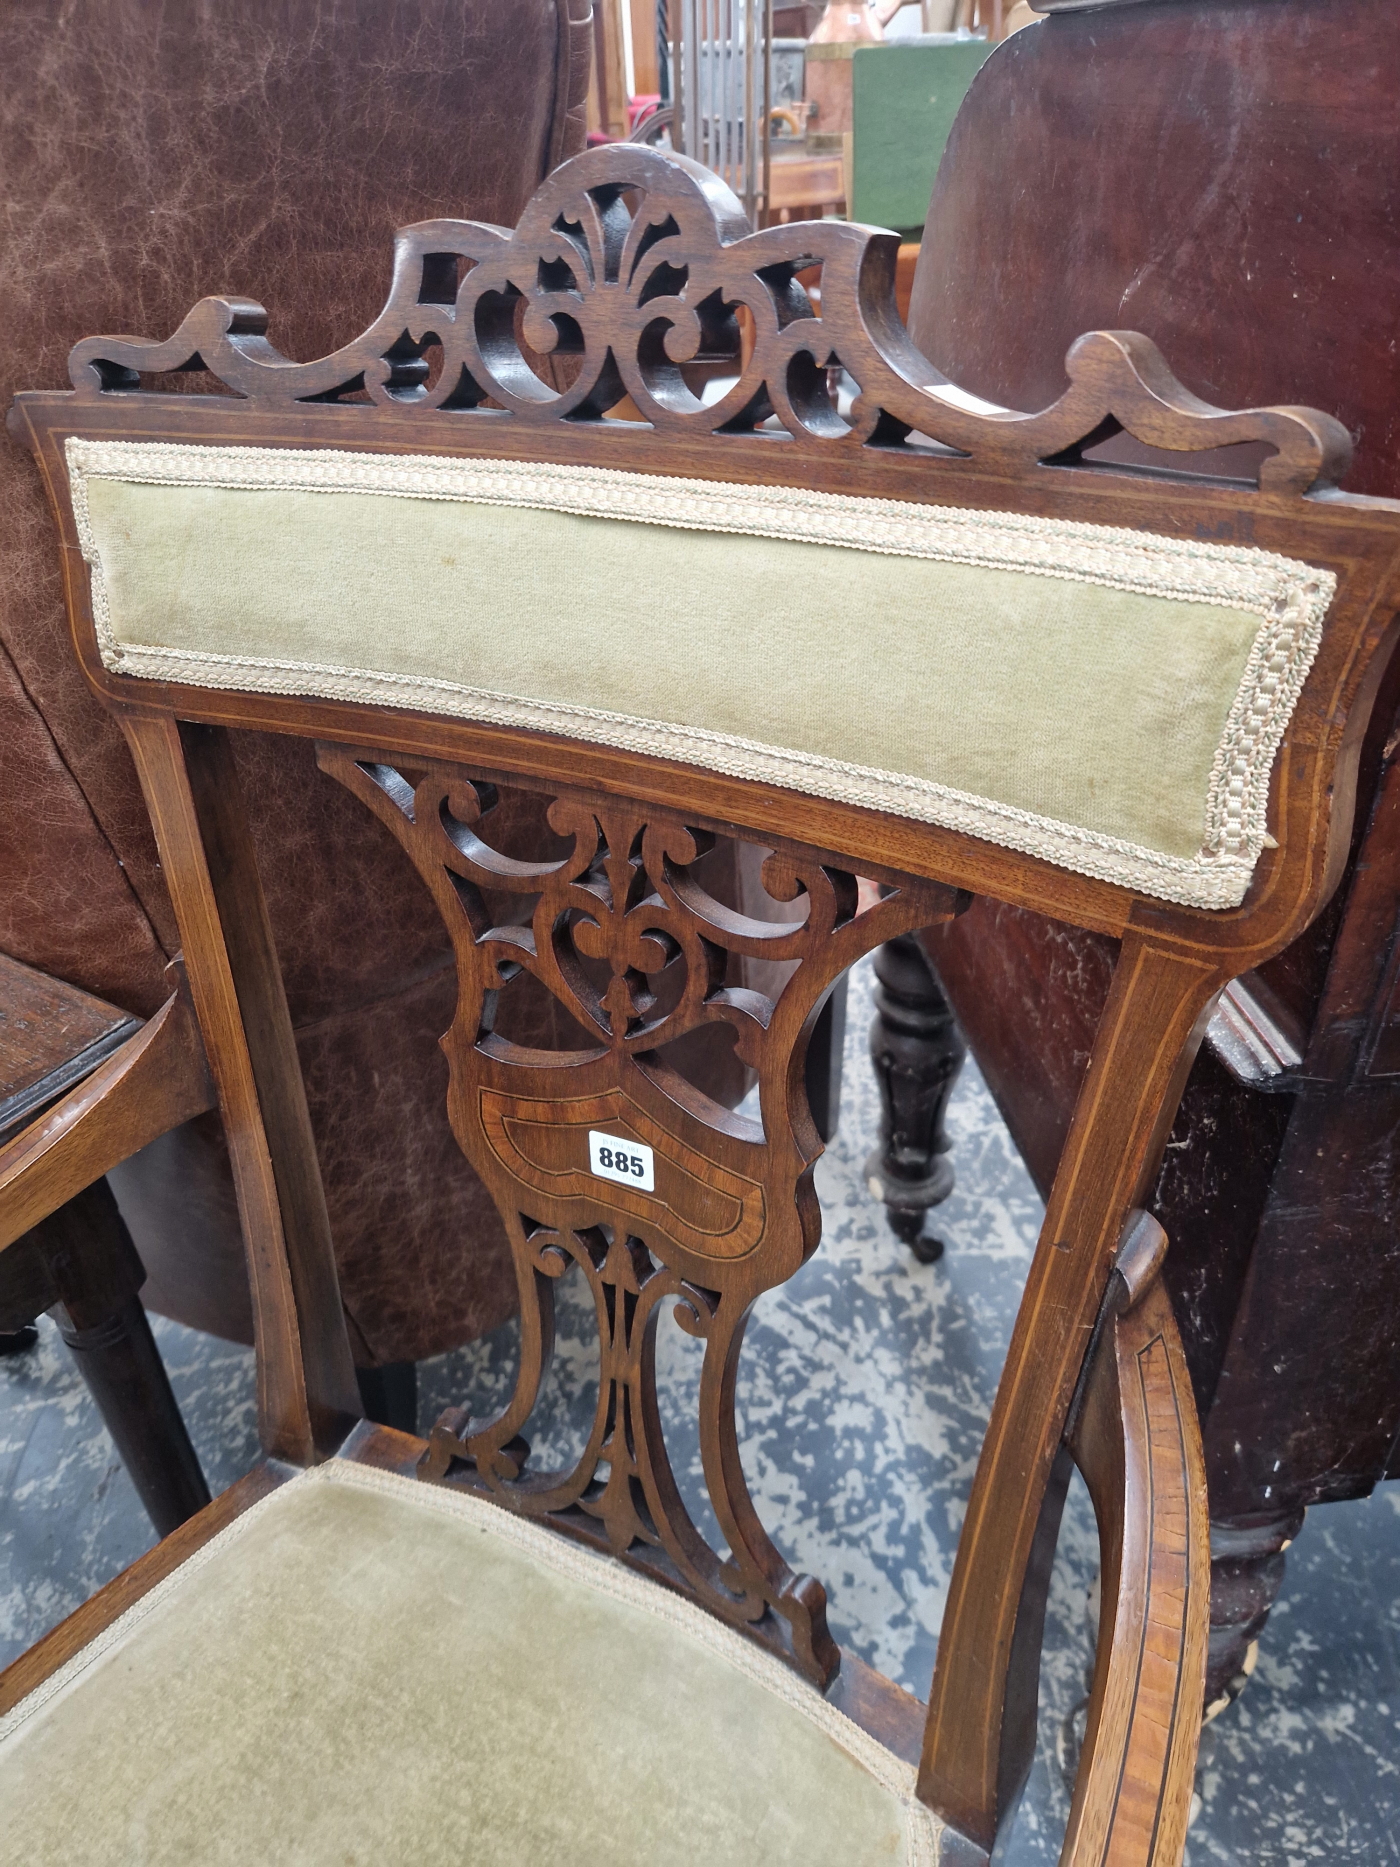 AN EARLY 20th C. SATIN WOOD BANDED MAHOGANY ELBOW CHAIR WITH AN UPHOLSTERED TOP RAIL OVER THE SPLAT - Image 3 of 3